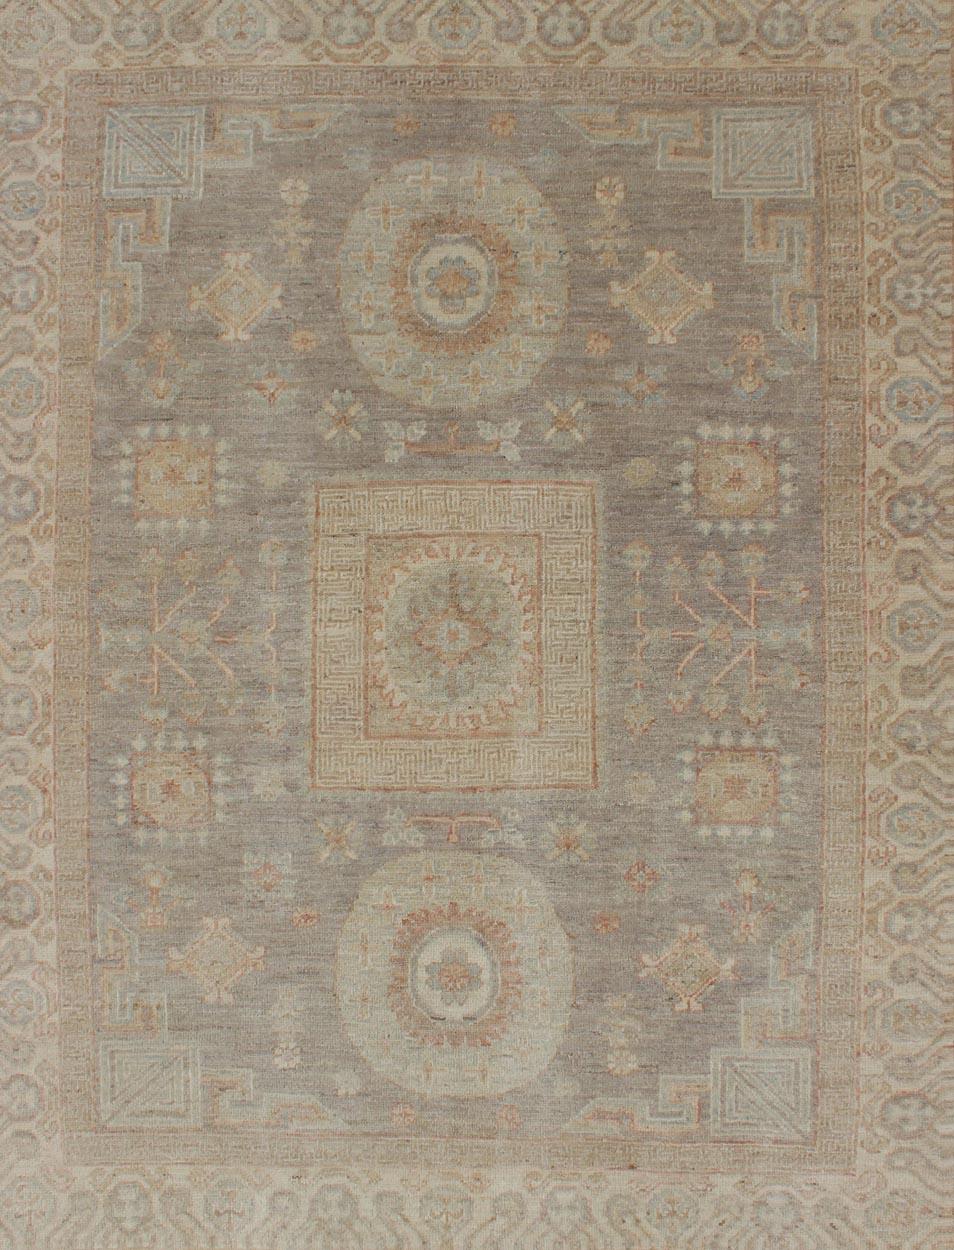 Fine Khotan Design Rug with Samarkand Design in Muted Tones In Excellent Condition For Sale In Atlanta, GA